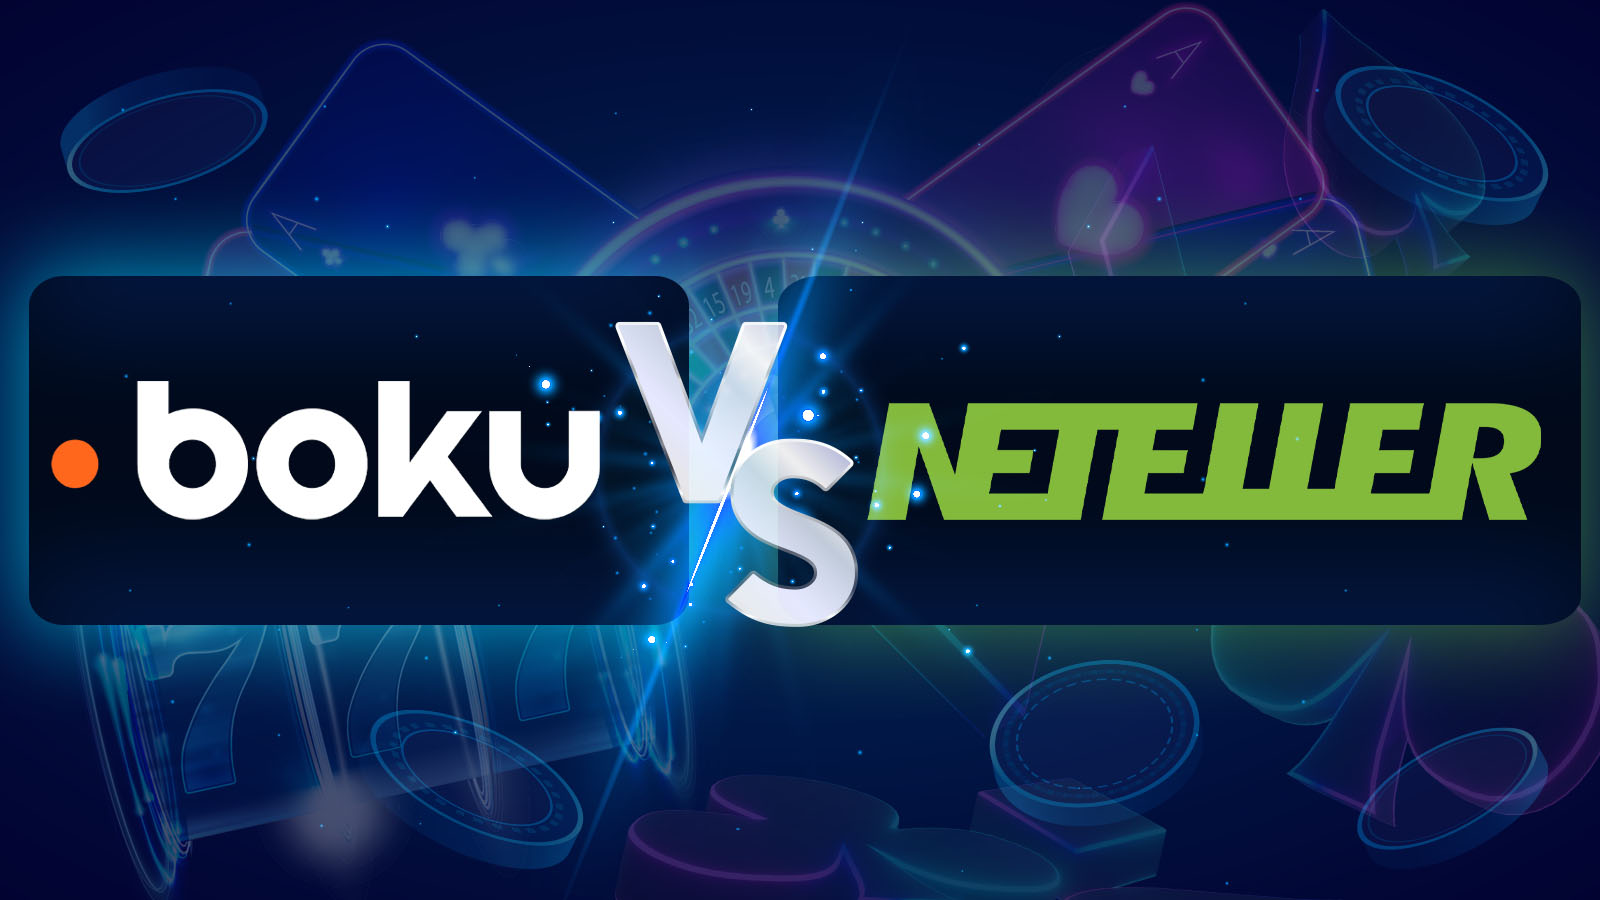 Neteller vs Boku- Which One is Better to Use at Online Casinos